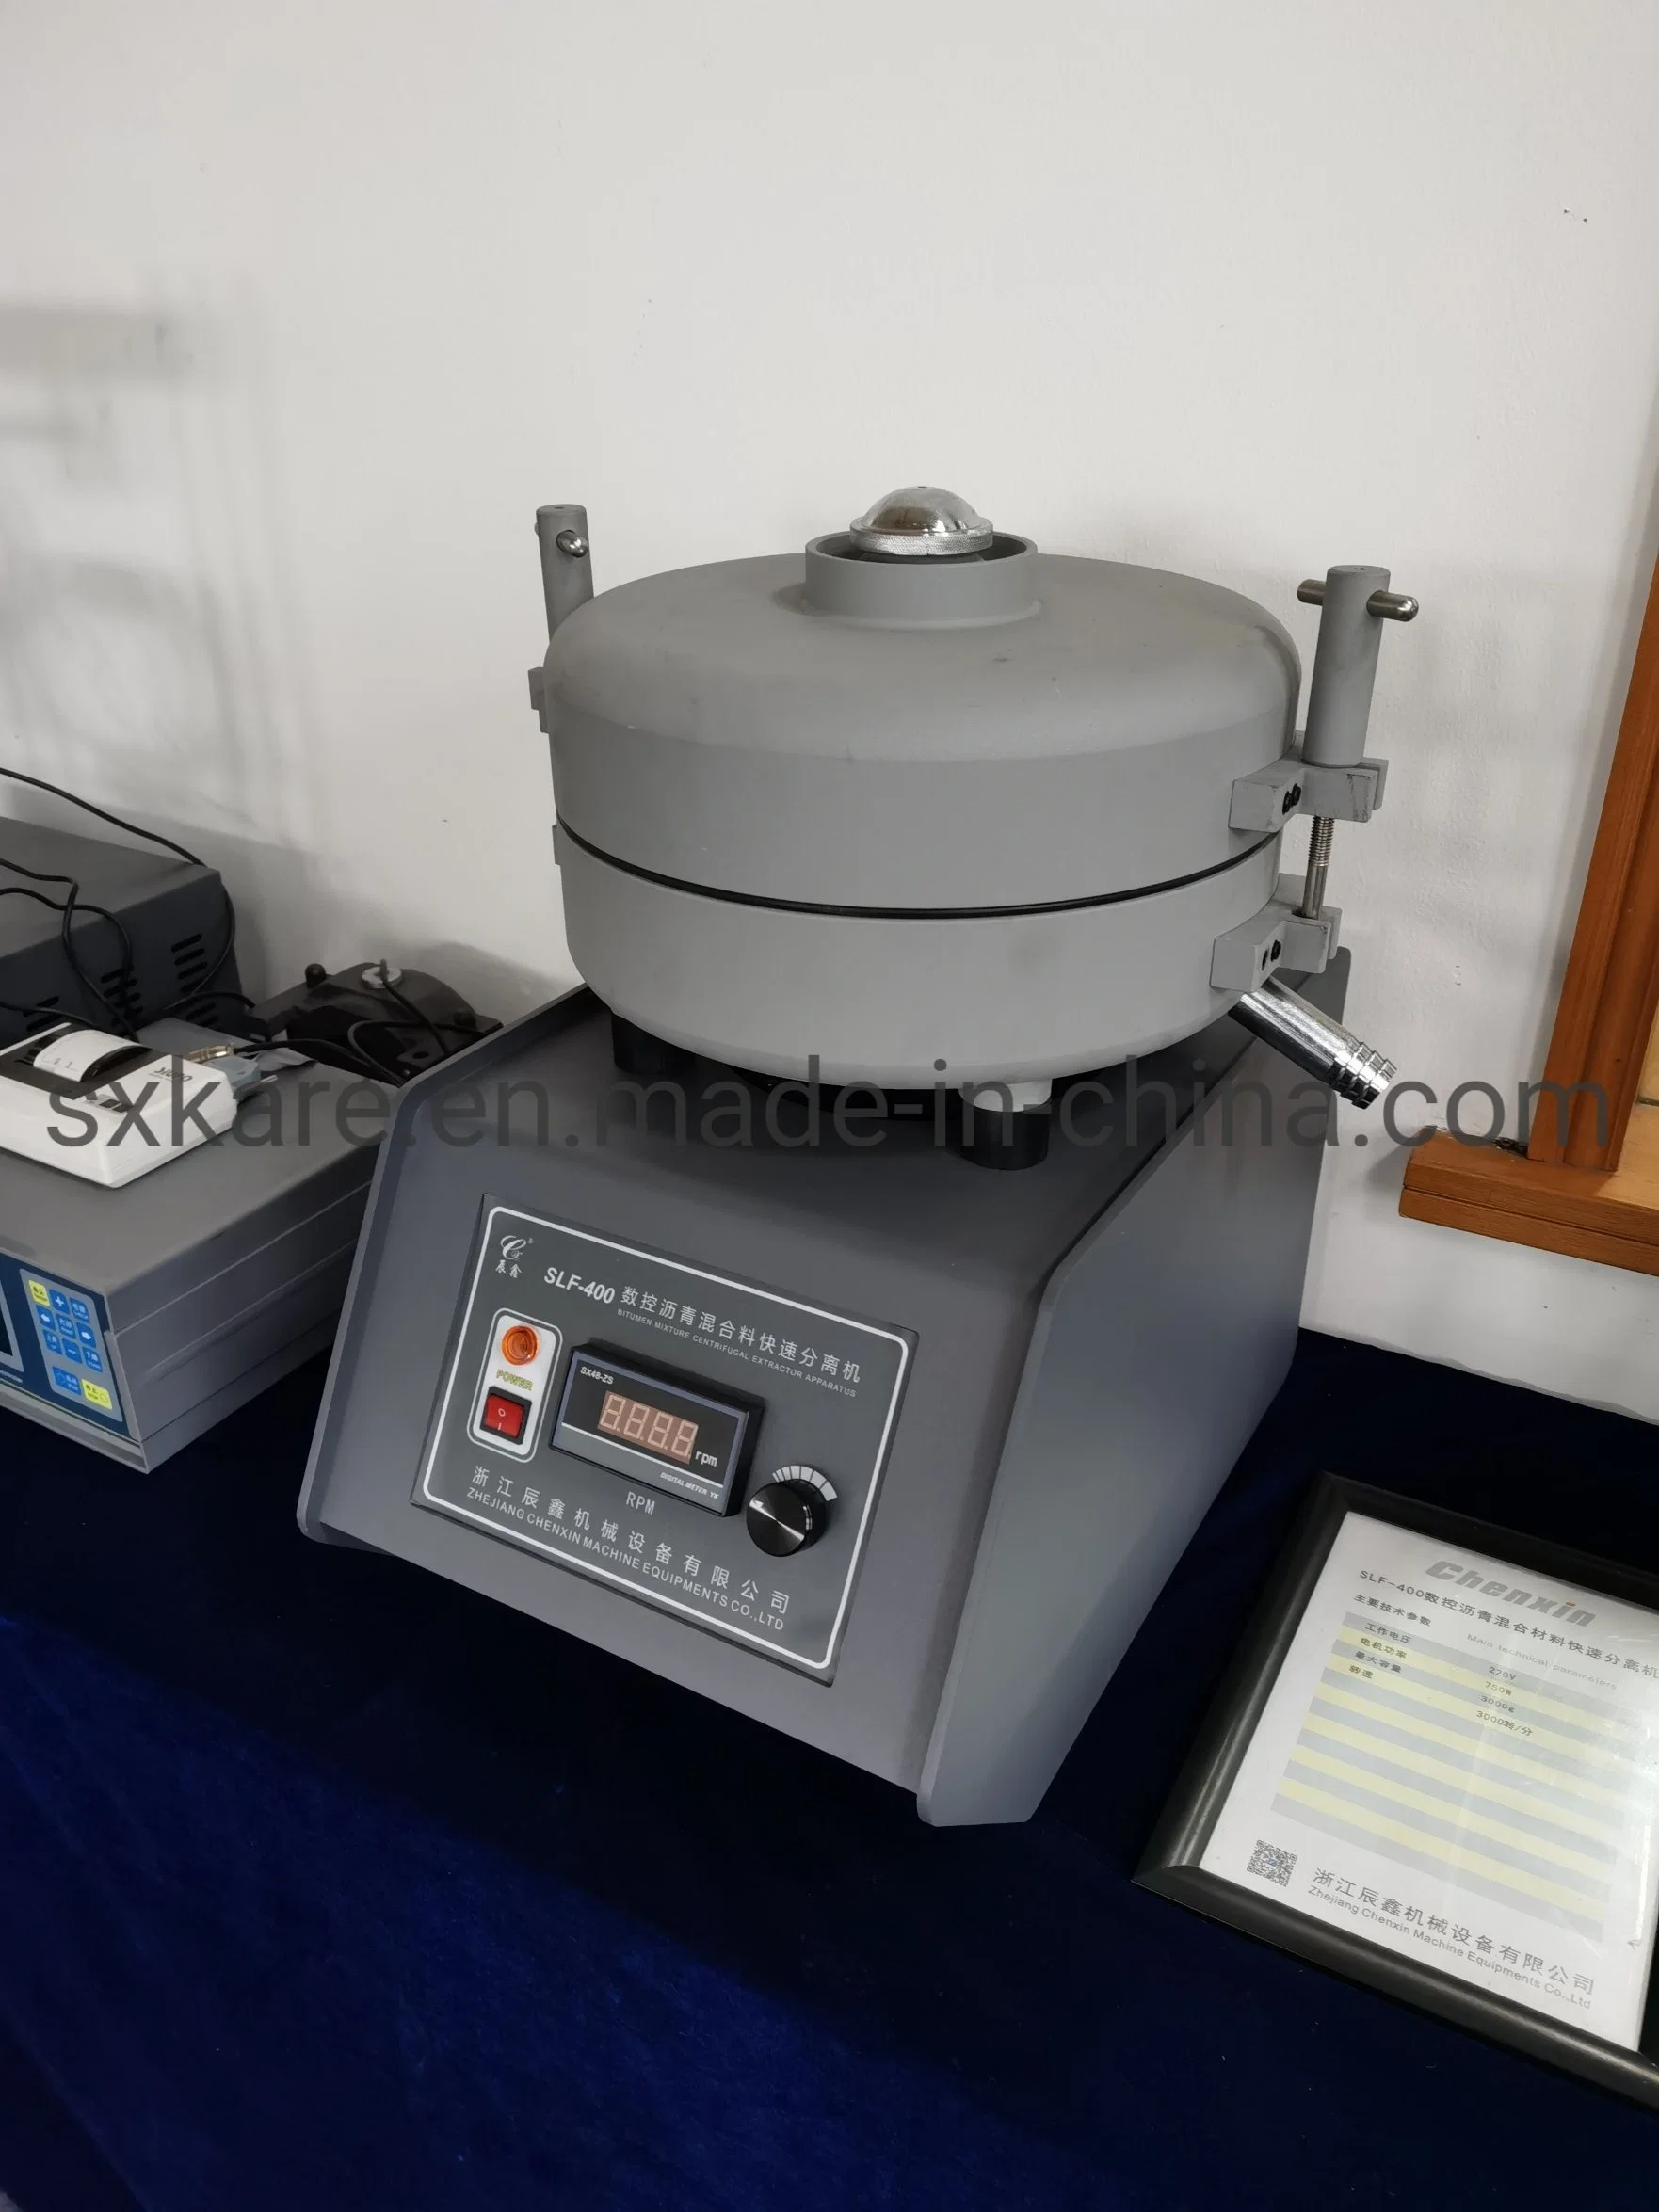 Bituminous Mixtures Centrifugal Extractor Test Equipment with Rmp Meter (SLF-400)